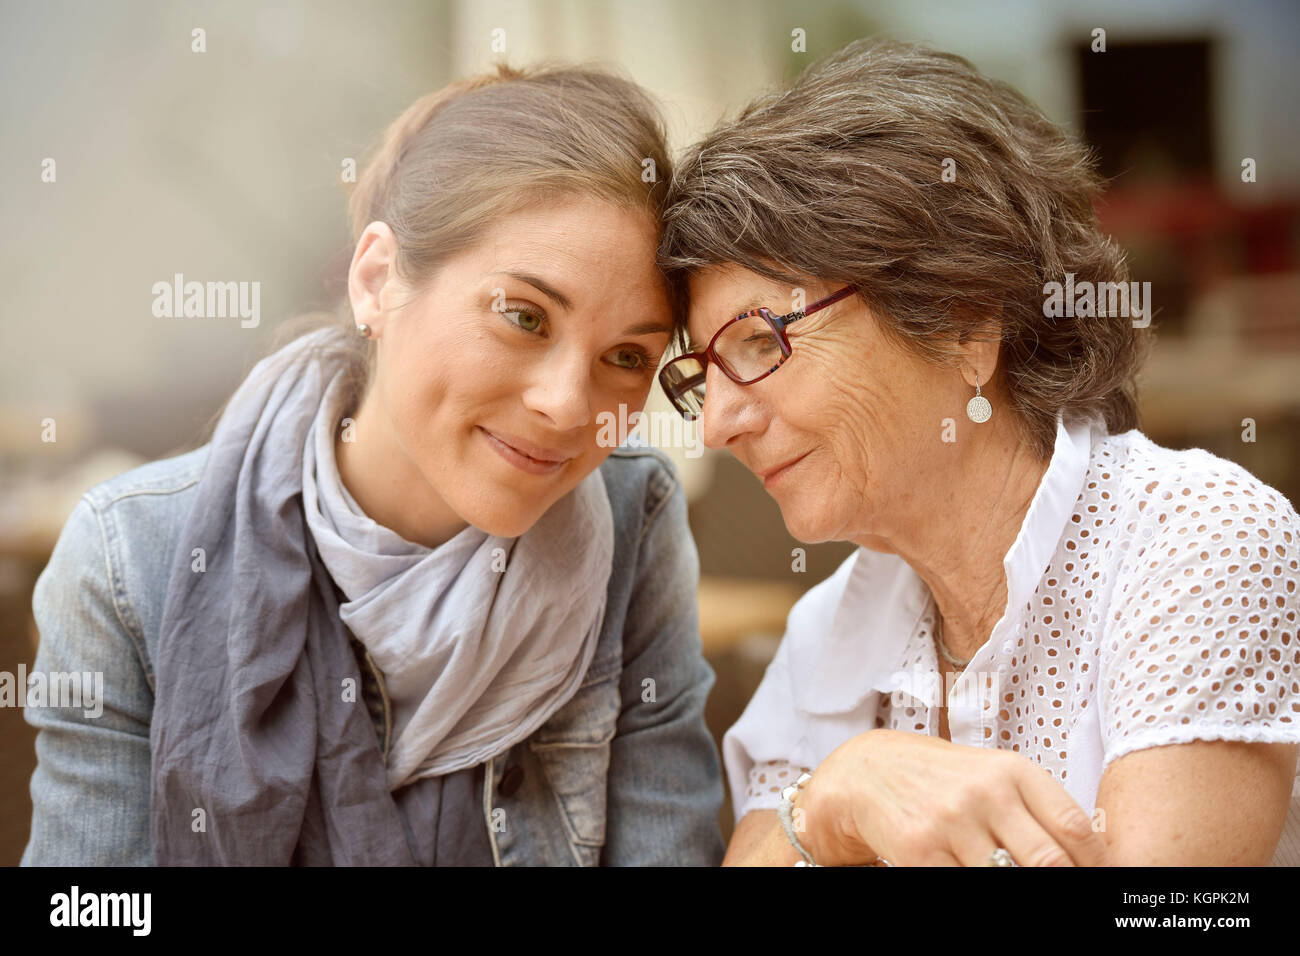 Portrait of elderly woman with home carer Stock Photo